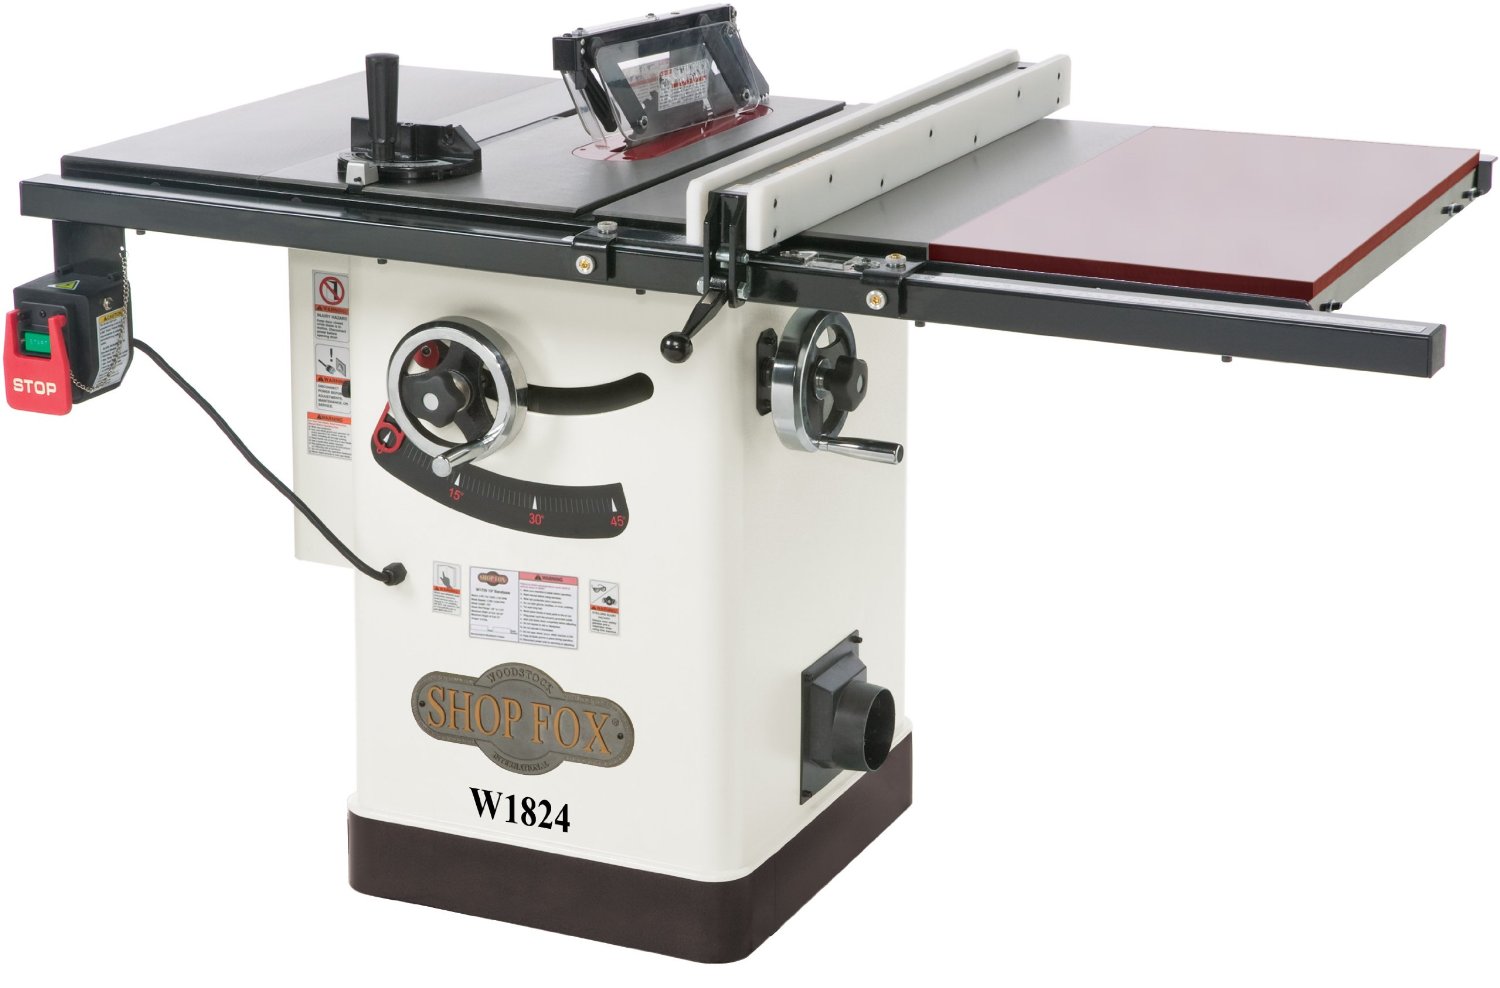 Woodworking table saw reviews Main Image